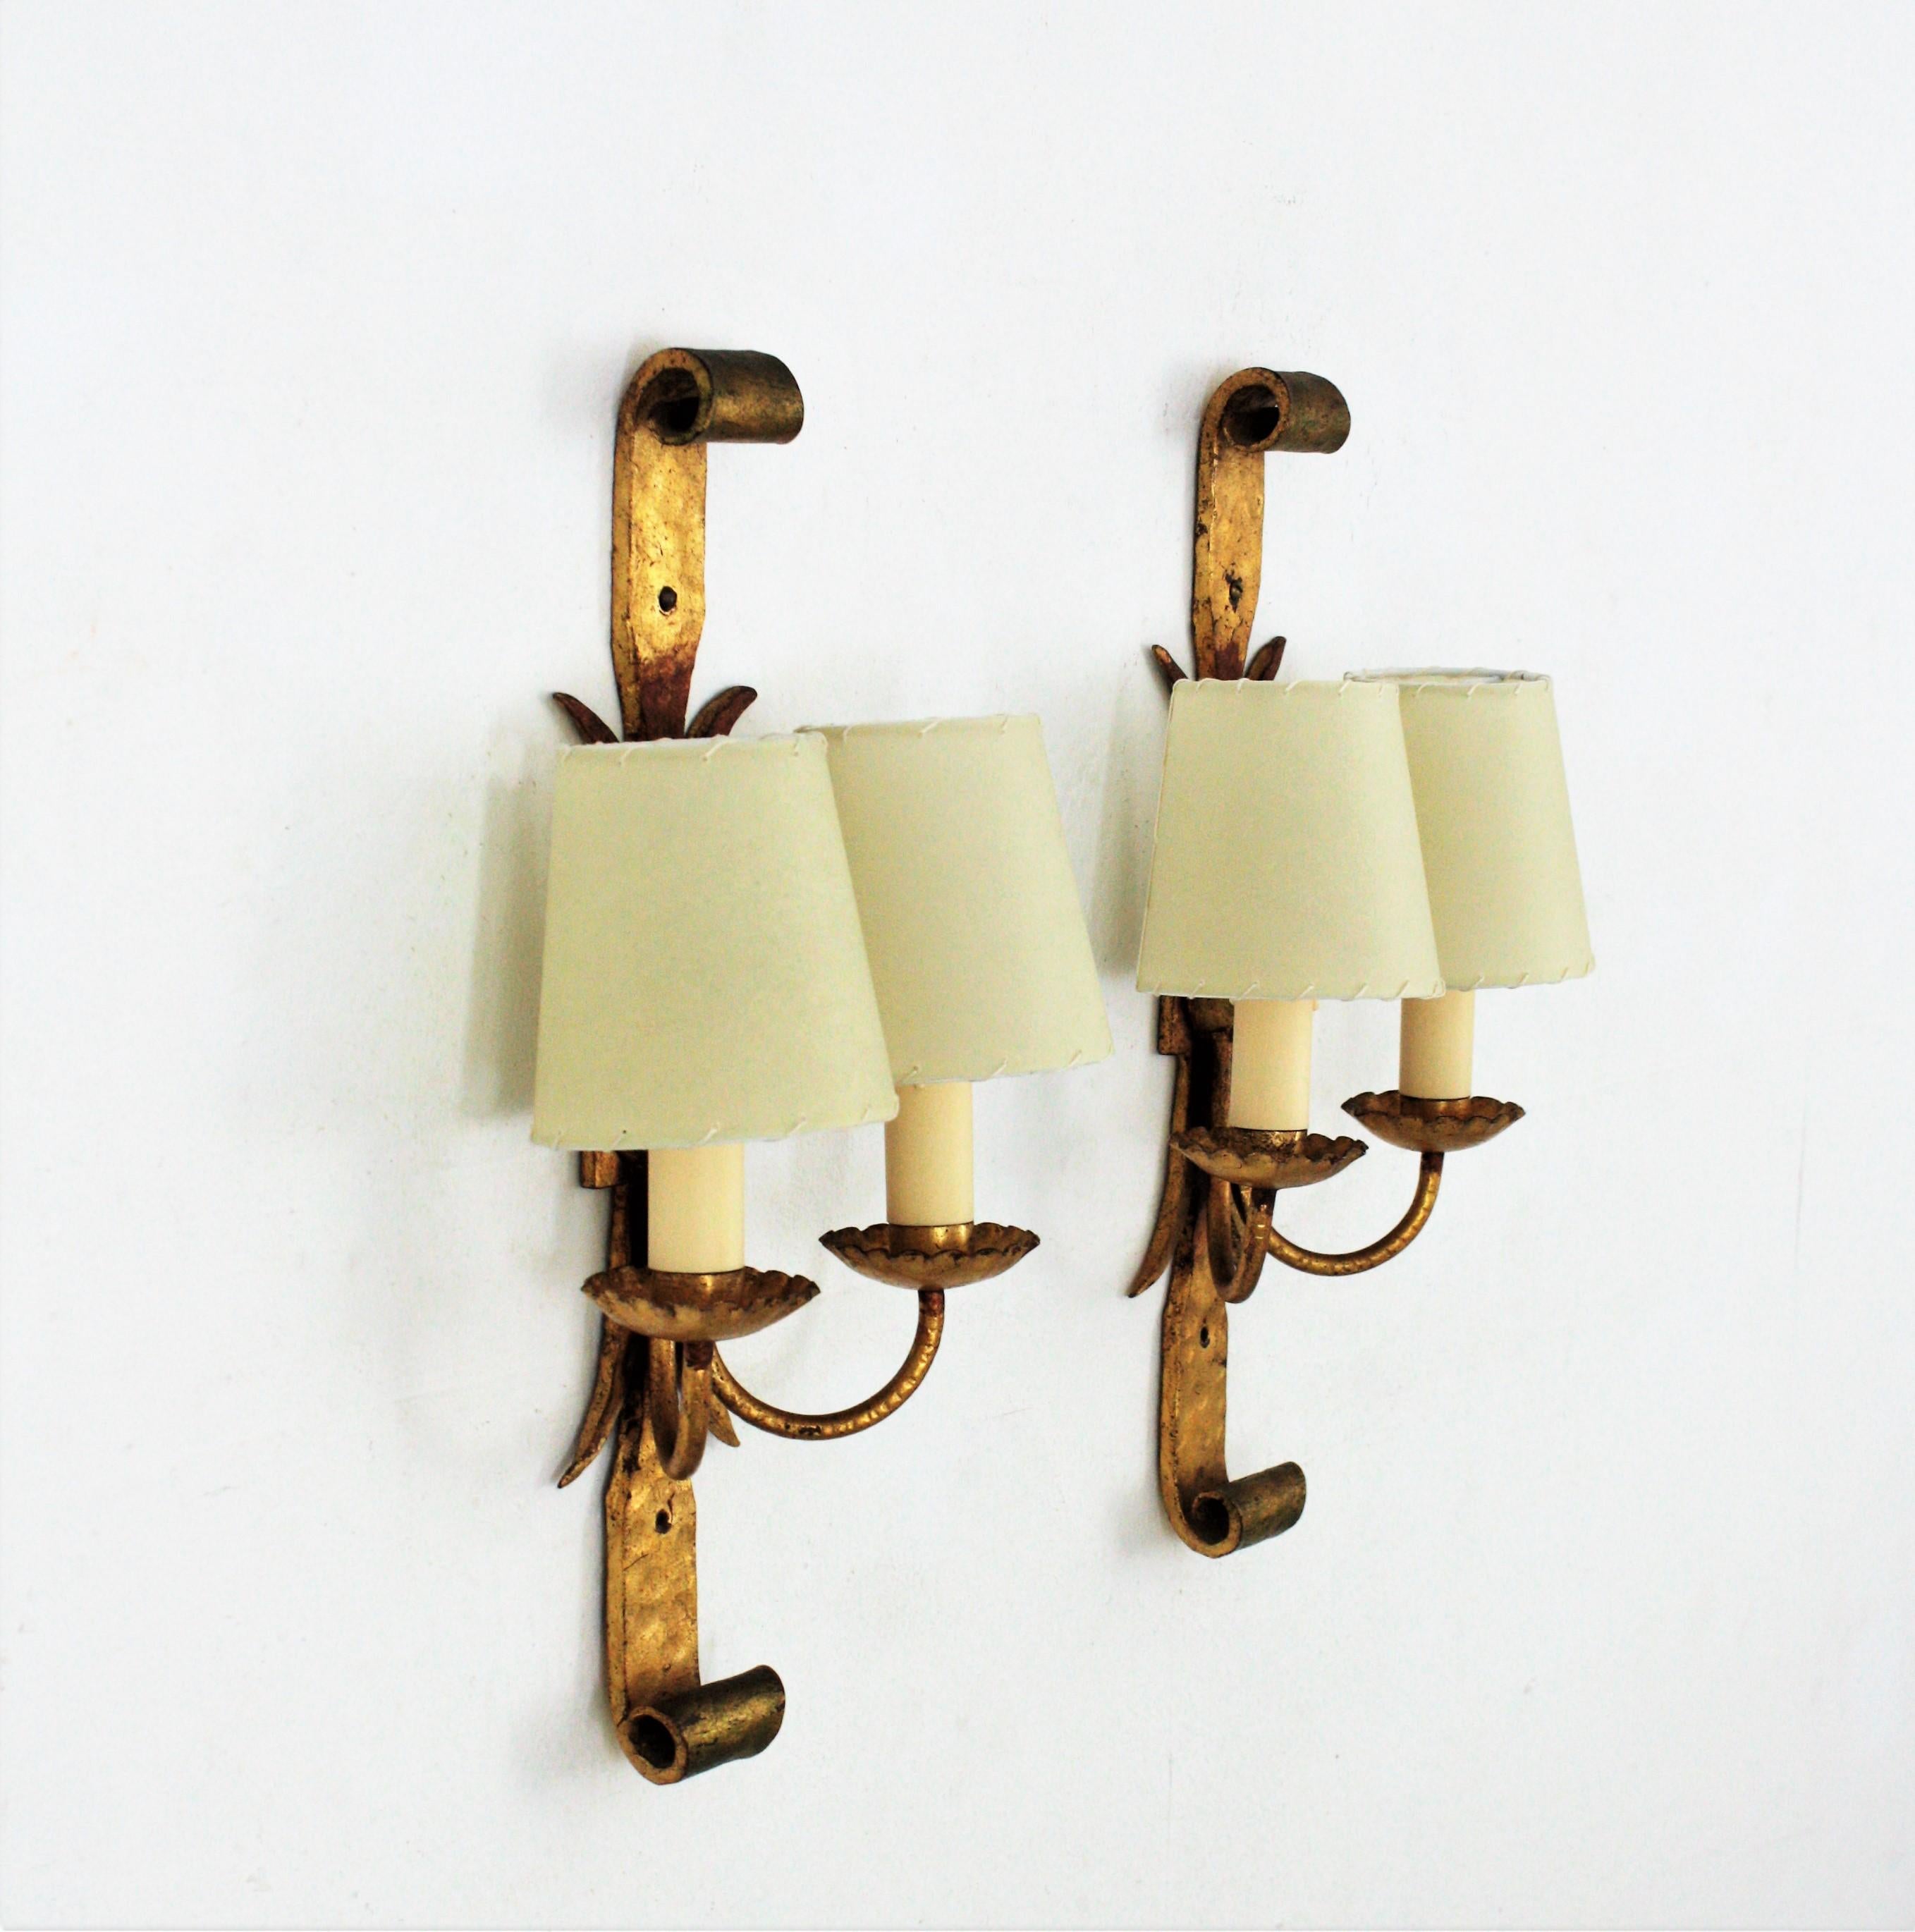 Pair of Spanish Revival Wall Sconces in Gilt Wrought Iron 1